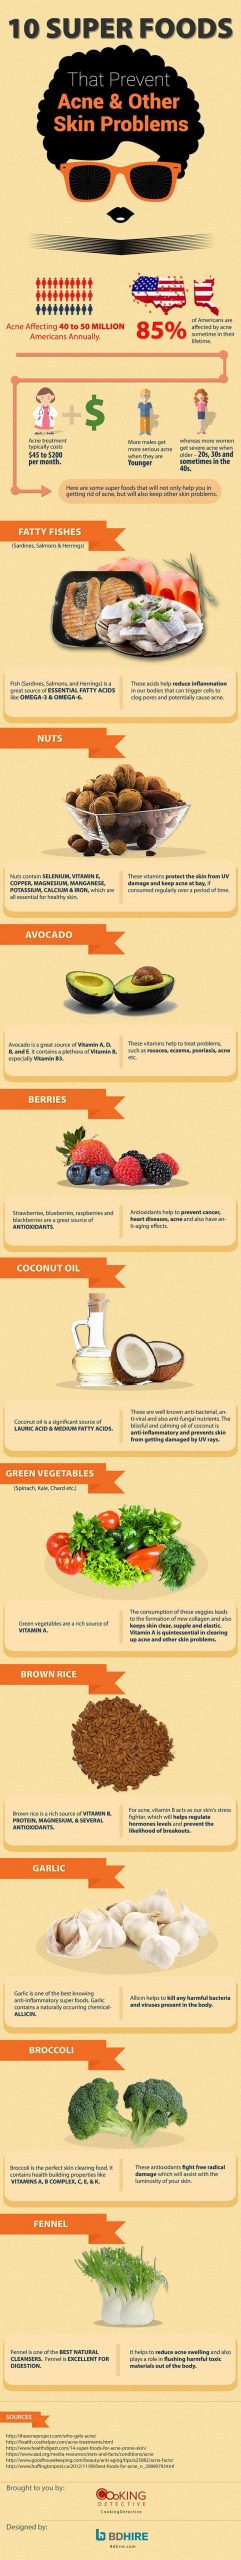 Super Foods That Prevent Acne & Skin Problems